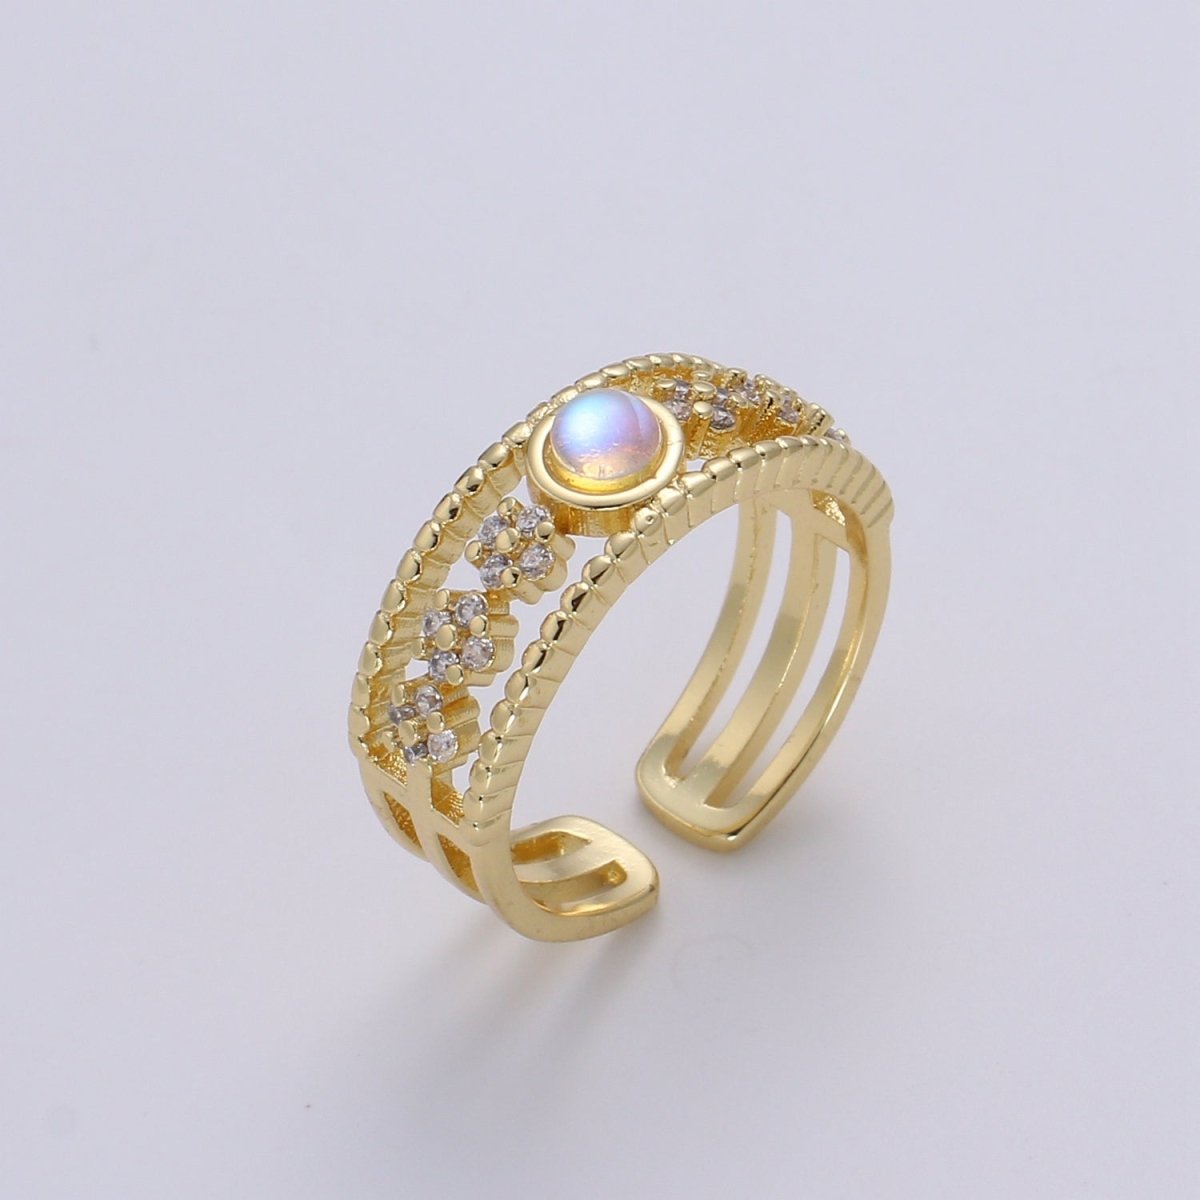 Moonstone Ring 24K Gold Ring, Cubic Zirconia Adjustable Gold Ring, Simple Ring, Sun Celestial Clear Cubic Zirconia Ring R531 - DLUXCA